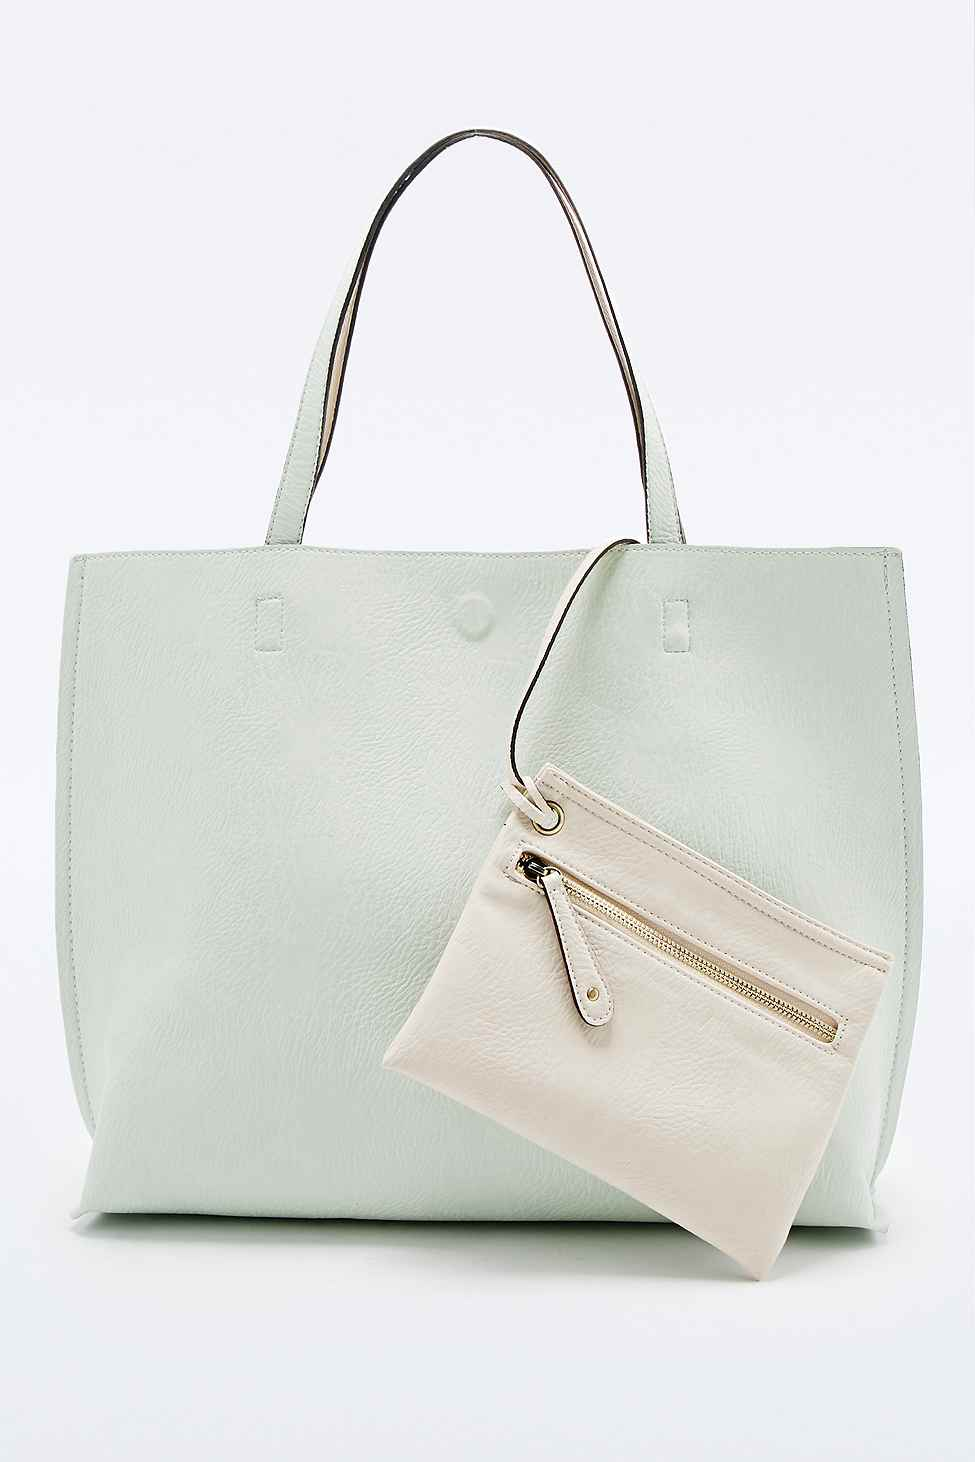 Urban outfitters Reversible Vegan Leather Oversized Tote Bag in Green (MINT) | Lyst